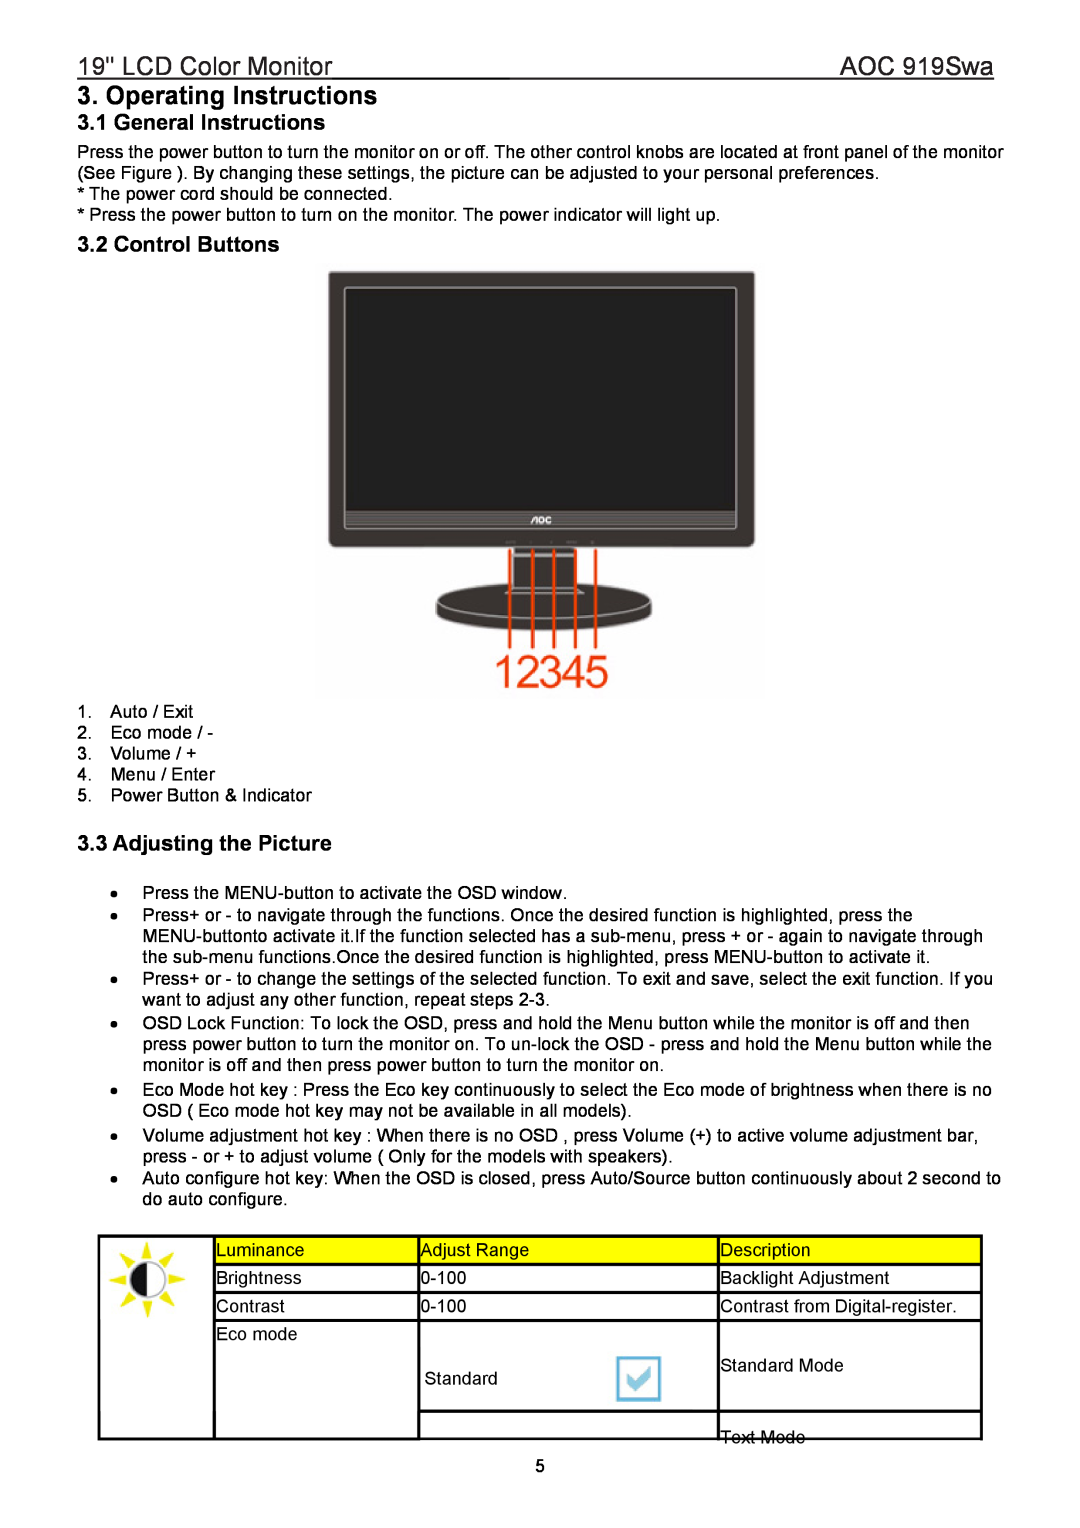 AOC 919SWA manual Operating Instructions, General Instructions, Control Buttons, Adjusting the Picture, LCD Color Monitor 